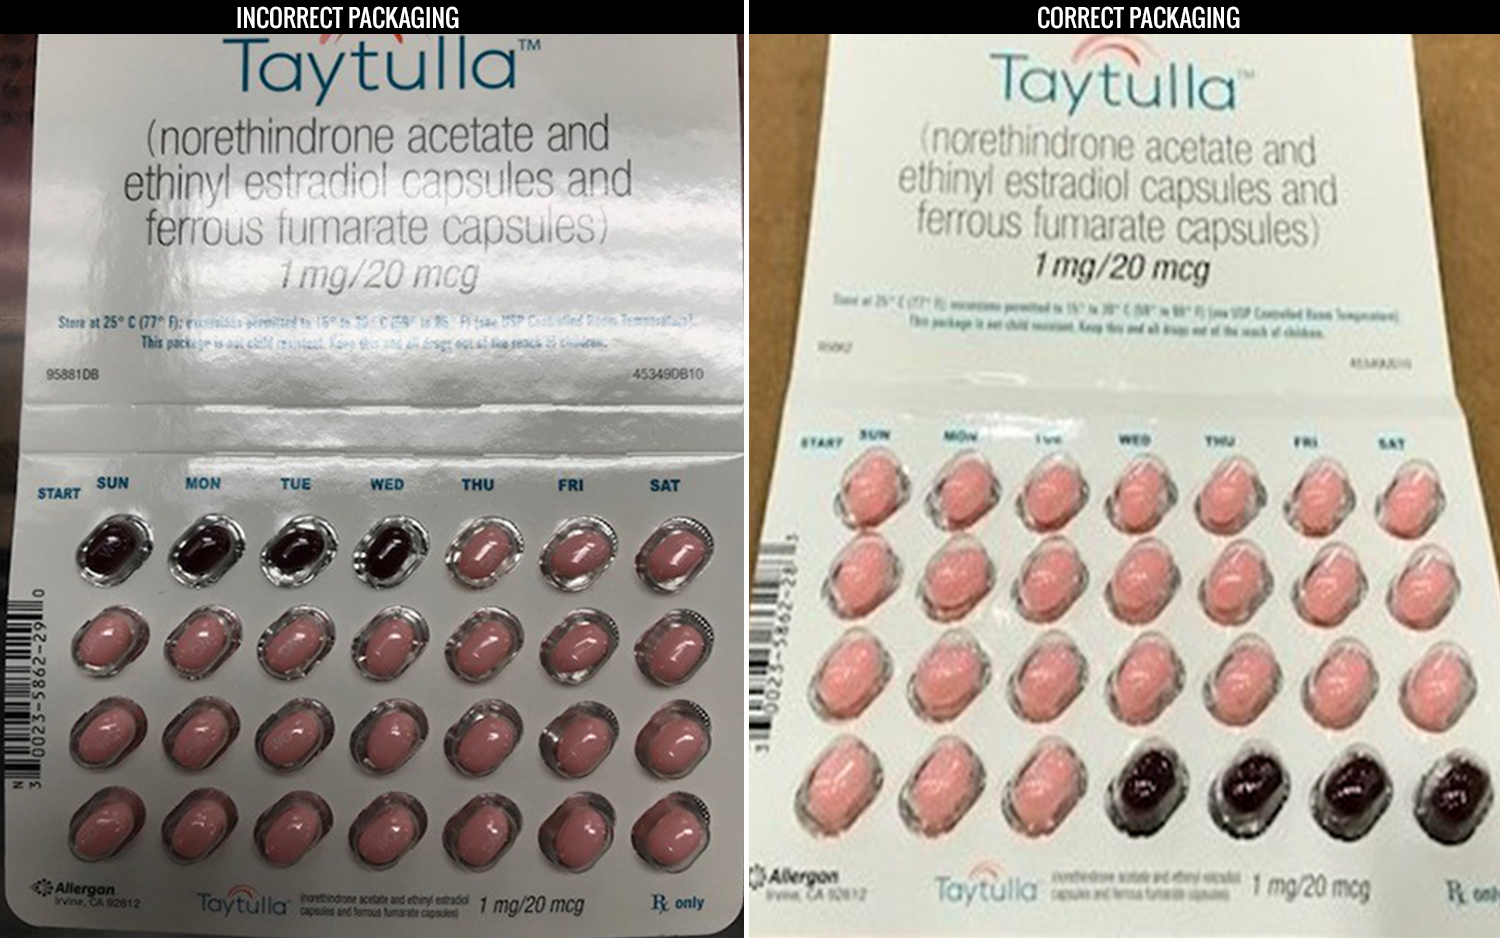 Nearly 170,000 Birth Control Pills Recalled Over Error That Could Raise